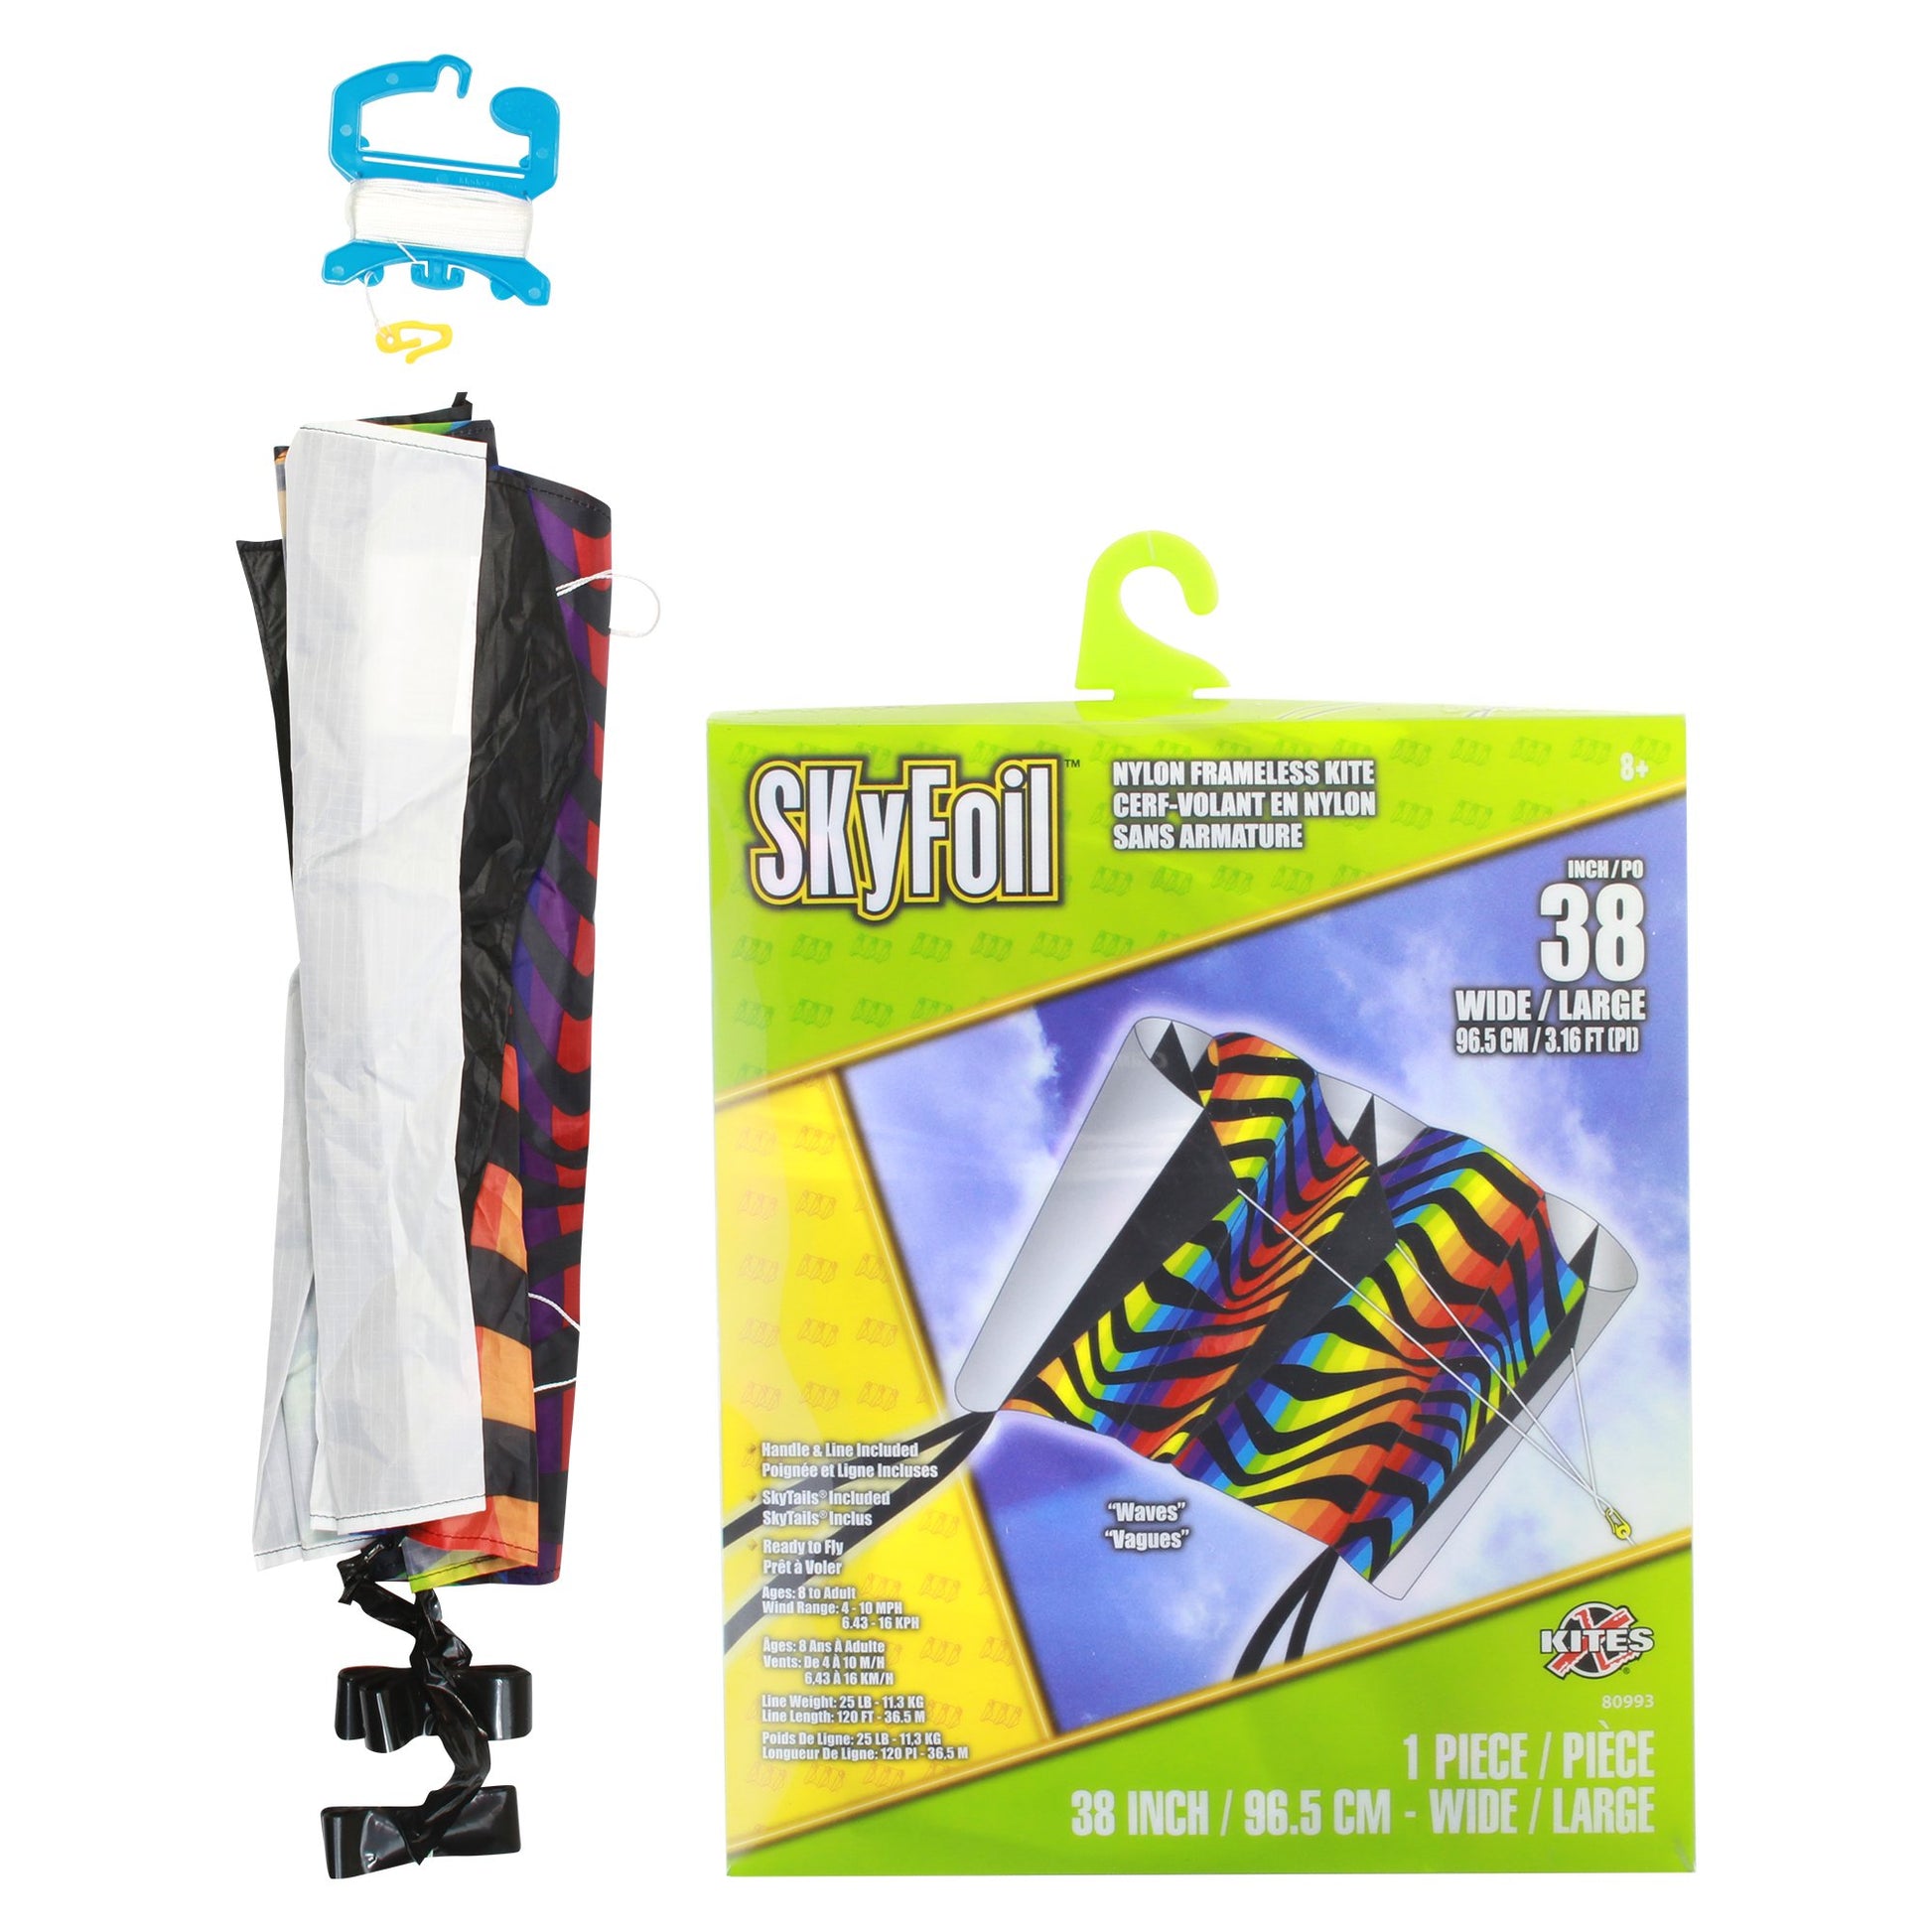 X Kites SkyFoil Waves + Pocket Kite Void Parafoil Kite Bundle - No Assembly Required packaging and contents